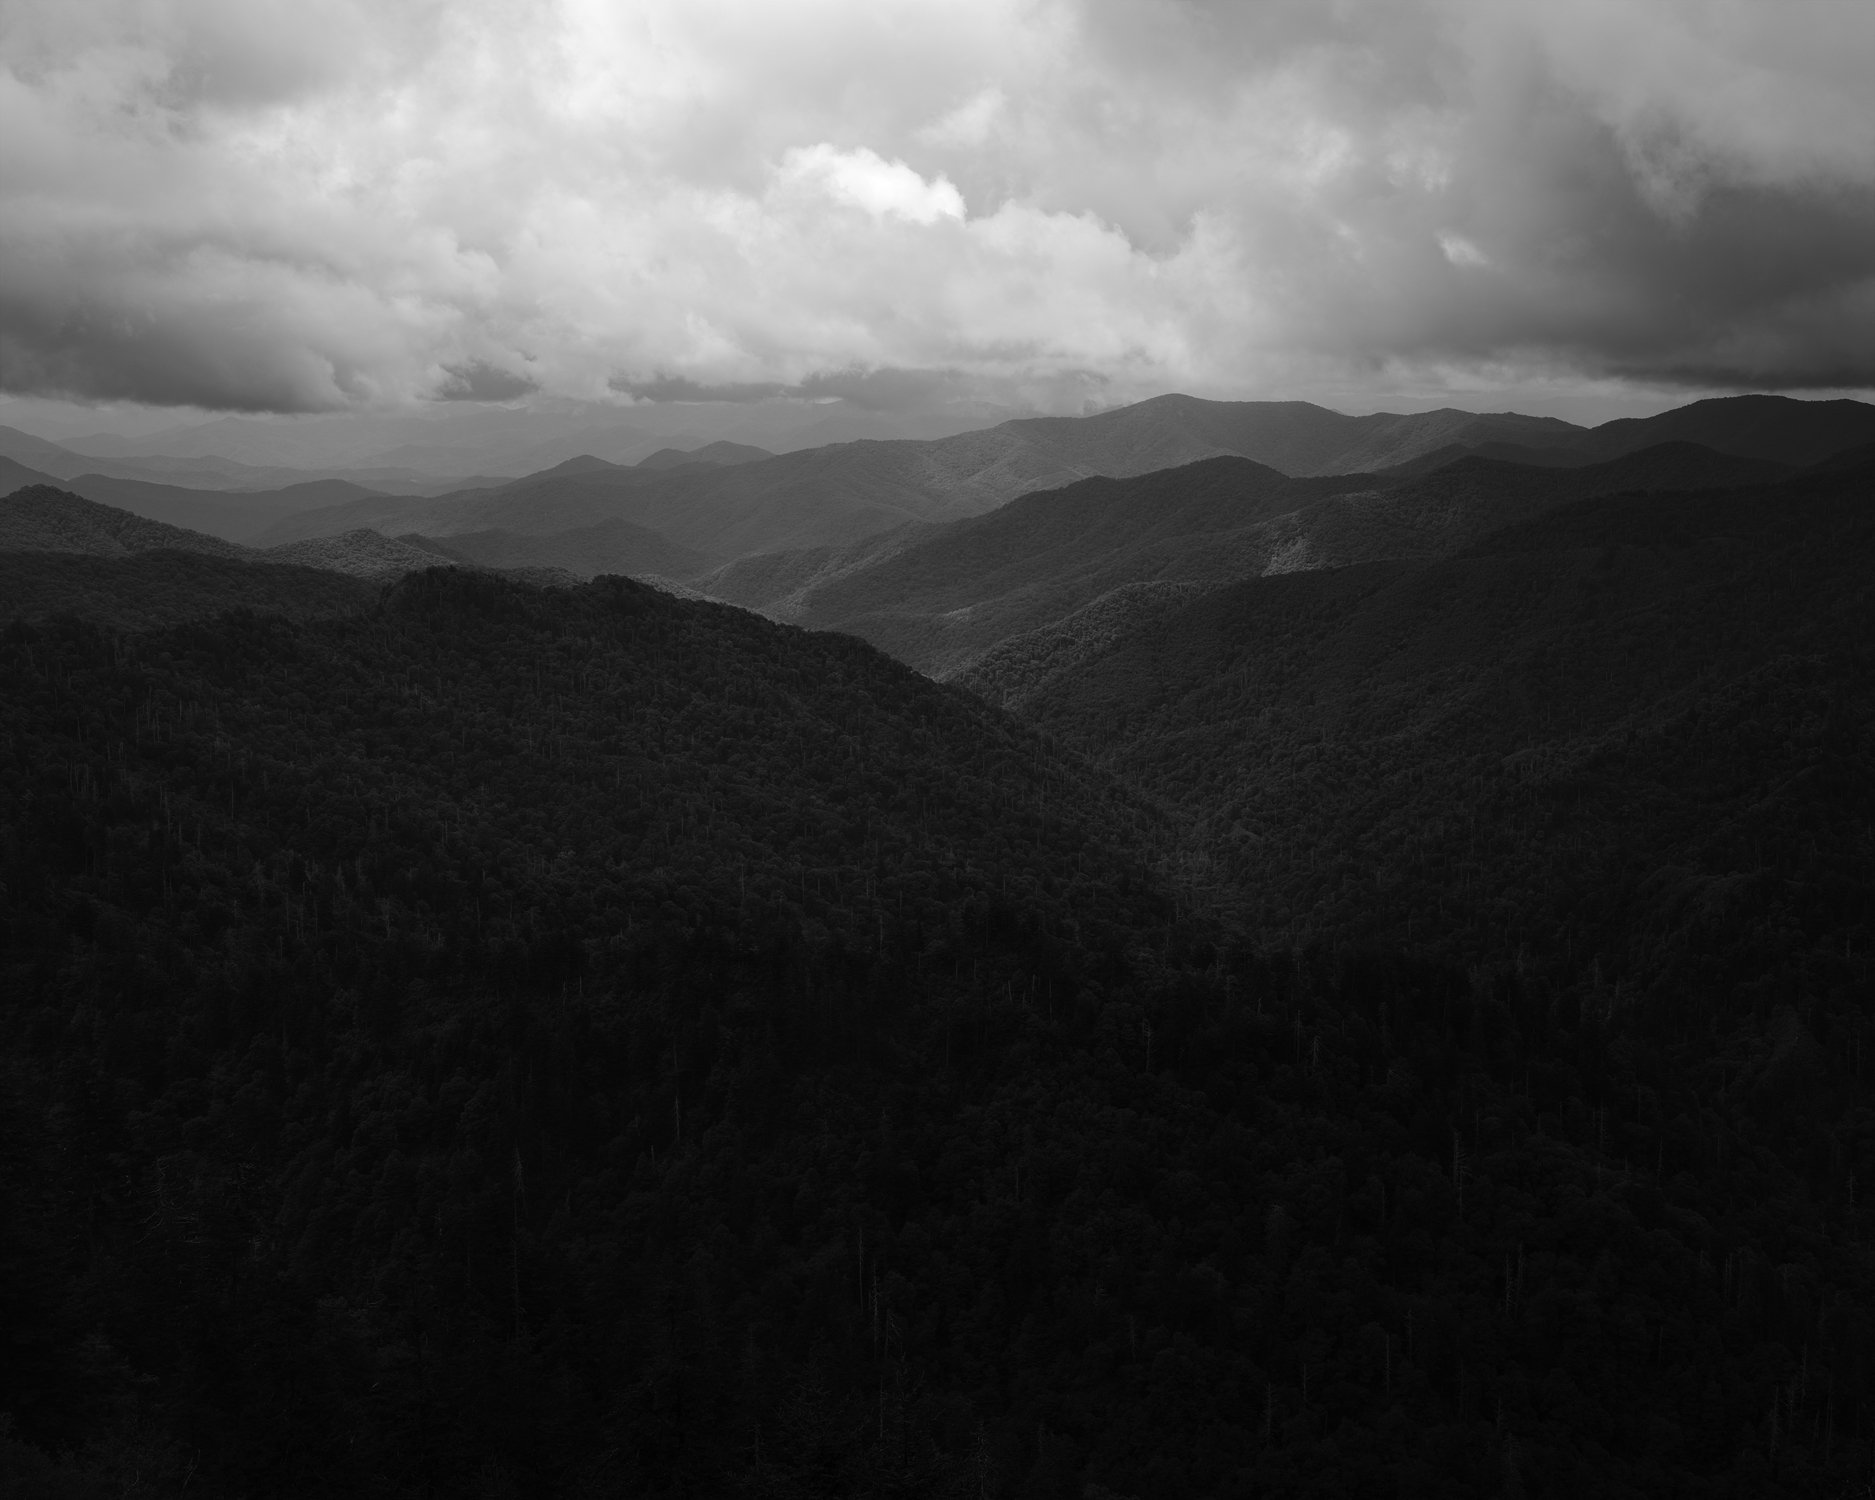 40_From_Bradley's_View_Great_Smoky_Mountains_Tennessee_Monday_July_12_2021.jpg